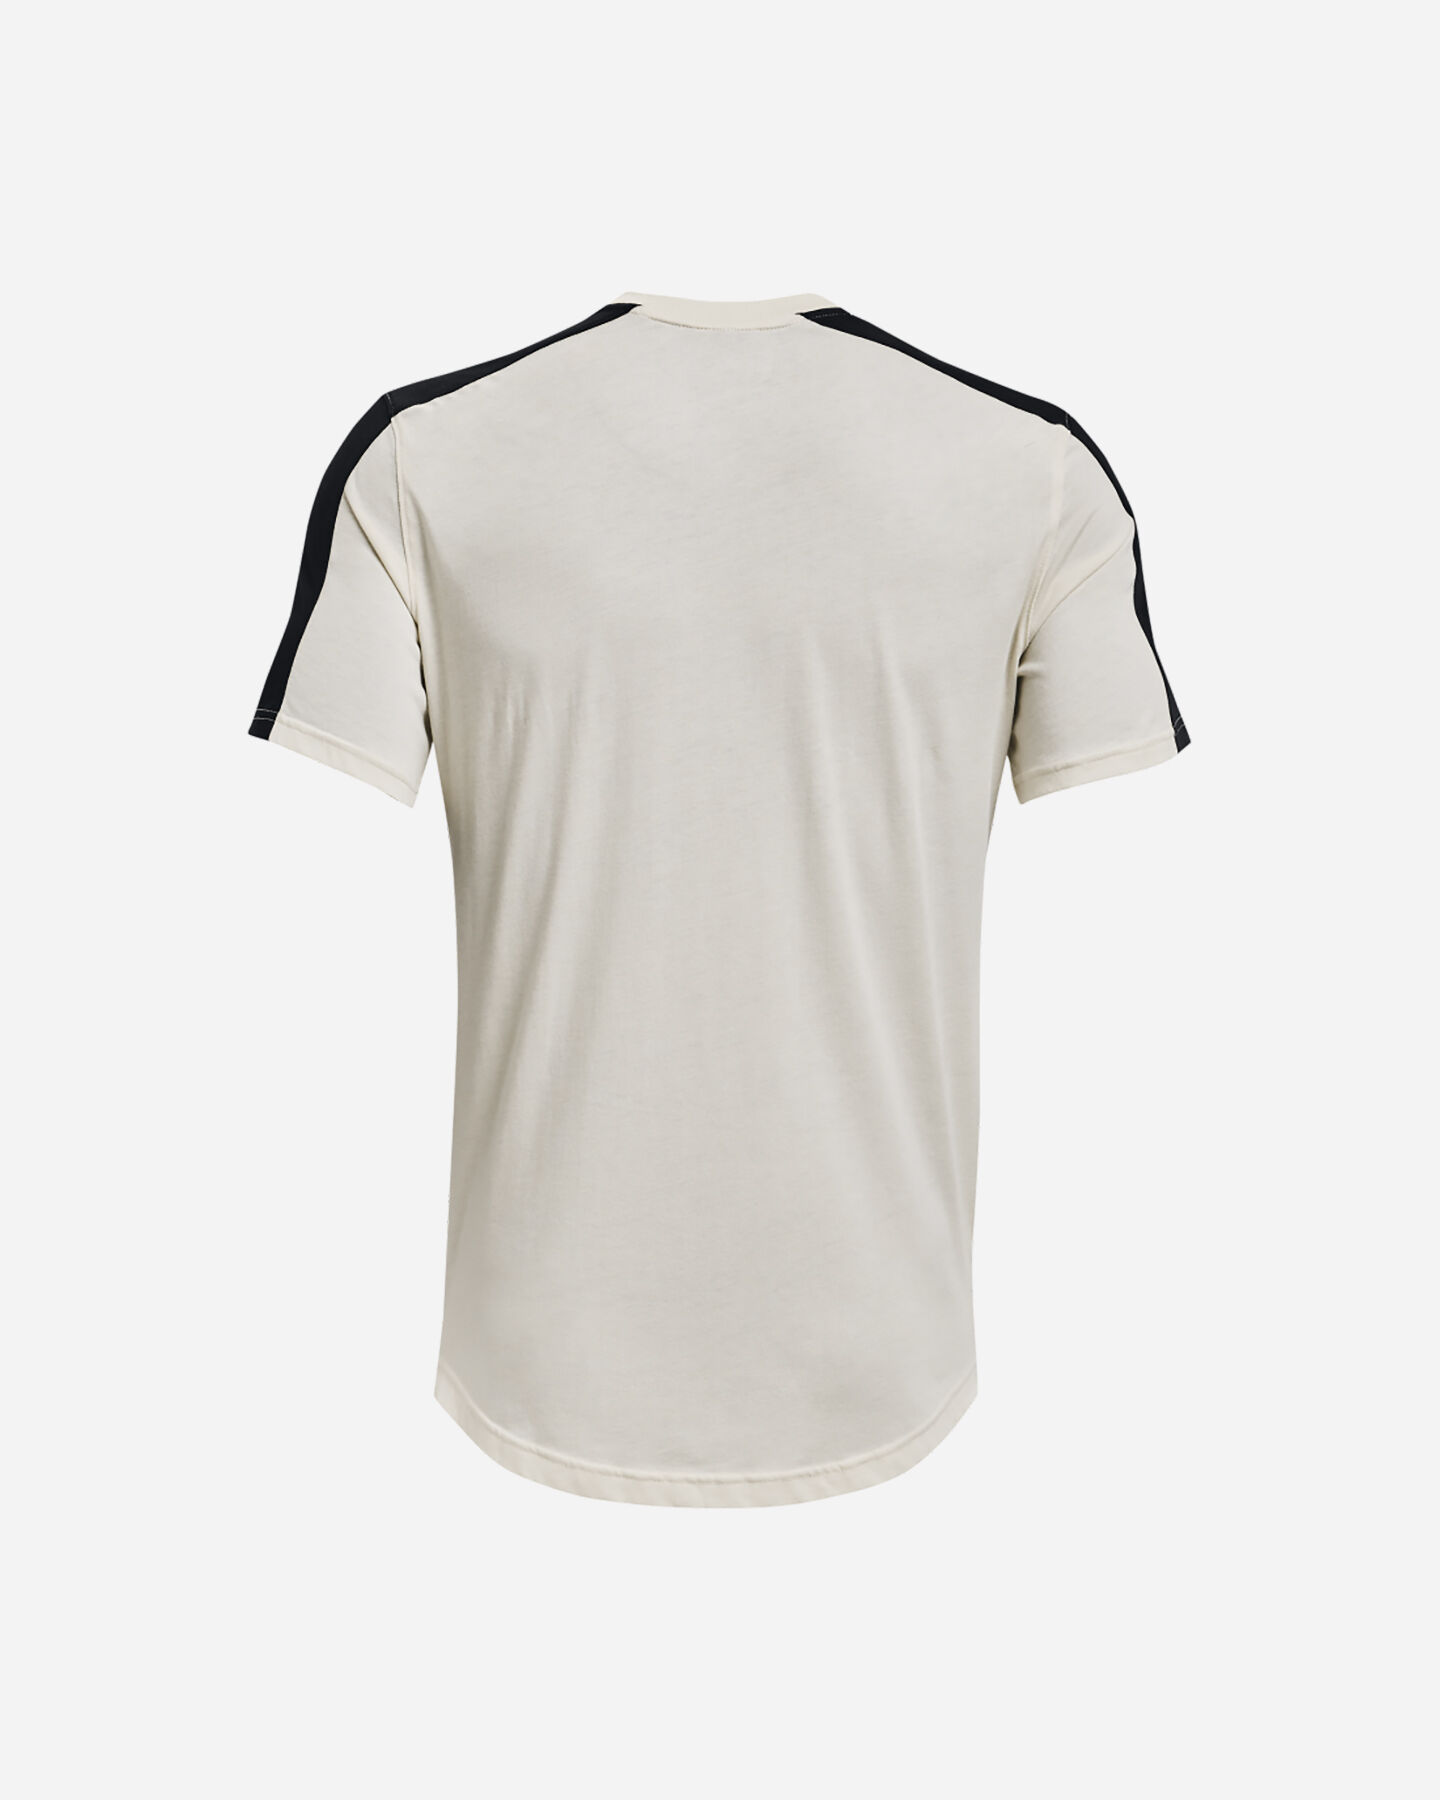  T-Shirt UNDER ARMOUR ATHLET POCKET M S5390701 scatto 1